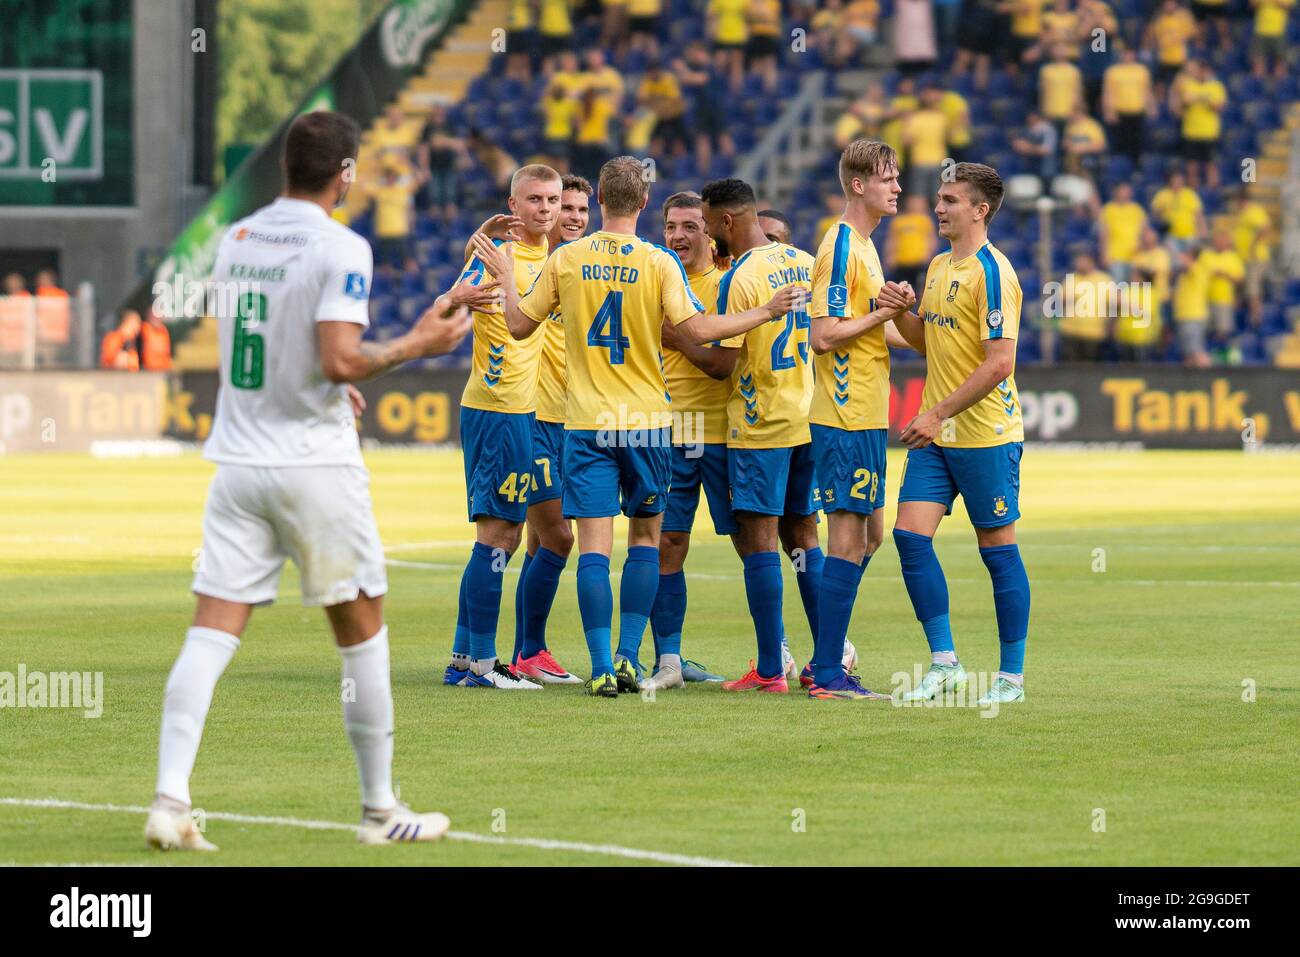 Broendby, Denmark. 25th July, 2021. Josip Radosevic (22) of Broendby IF scores for 1-0 during the 3F Superliga match between Broendby IF and Viborg FF at Broendby Stadion in Broendby. (Photo Credit: Gonzales Photo/Alamy Live News Stock Photo